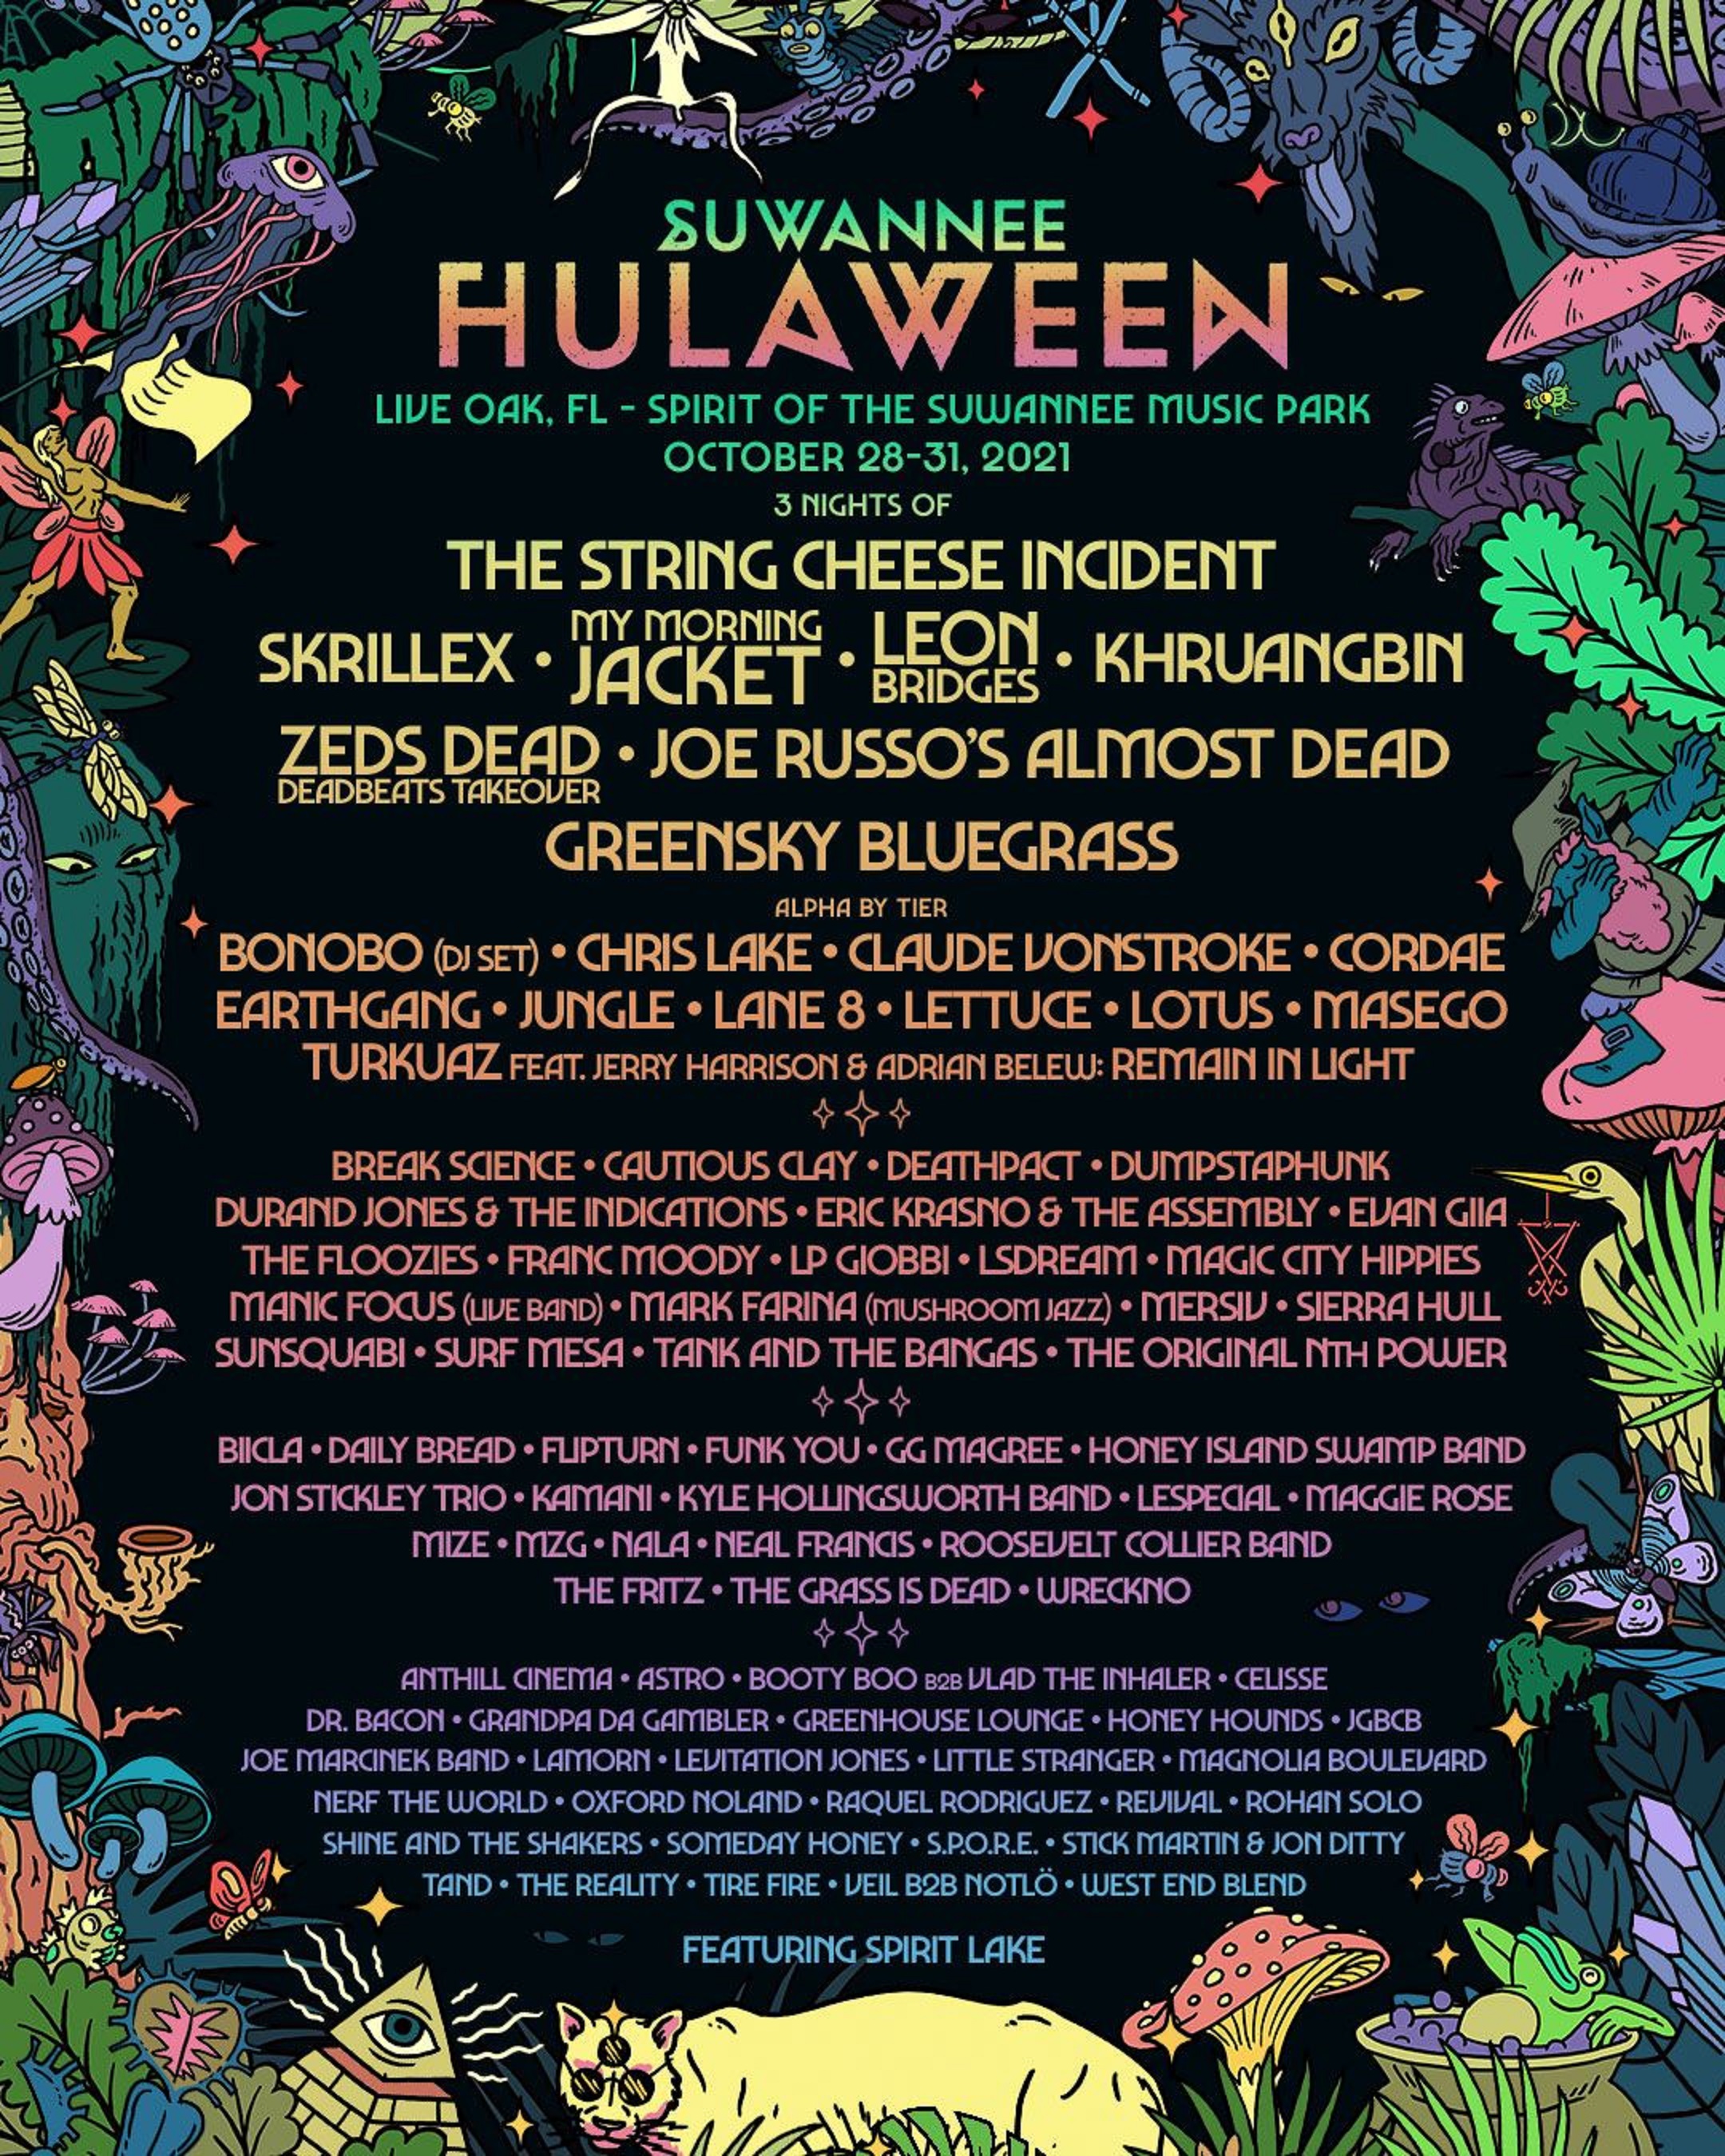 Six Artists to See Perform This Year At The Amazing Suwannee Hulaween